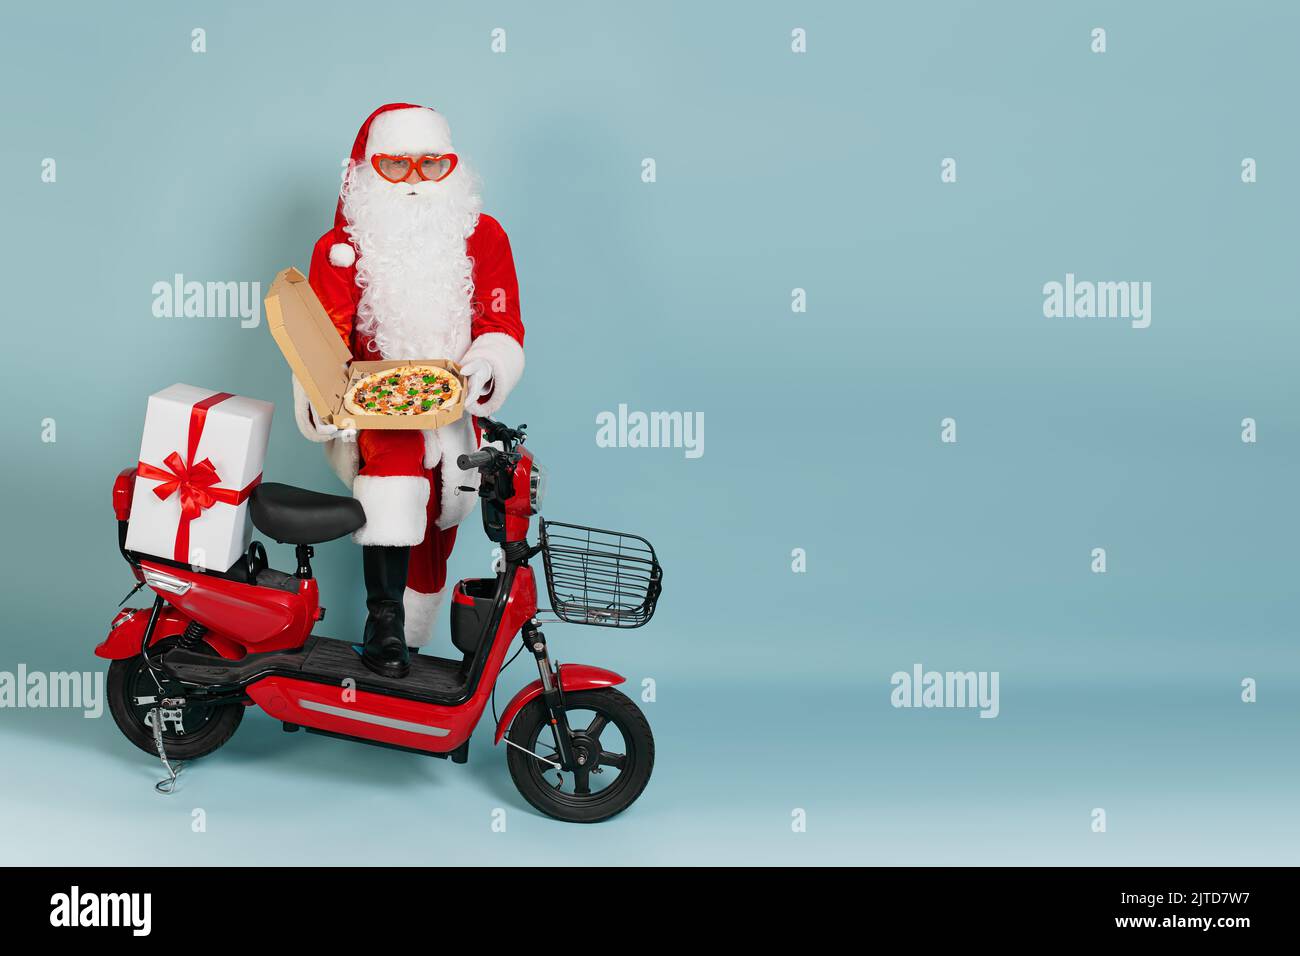 Full length portrait of santa claus in big red heart shaped glasses with an open box of pizza held in his hands in white gloves, against a red moped o Stock Photo